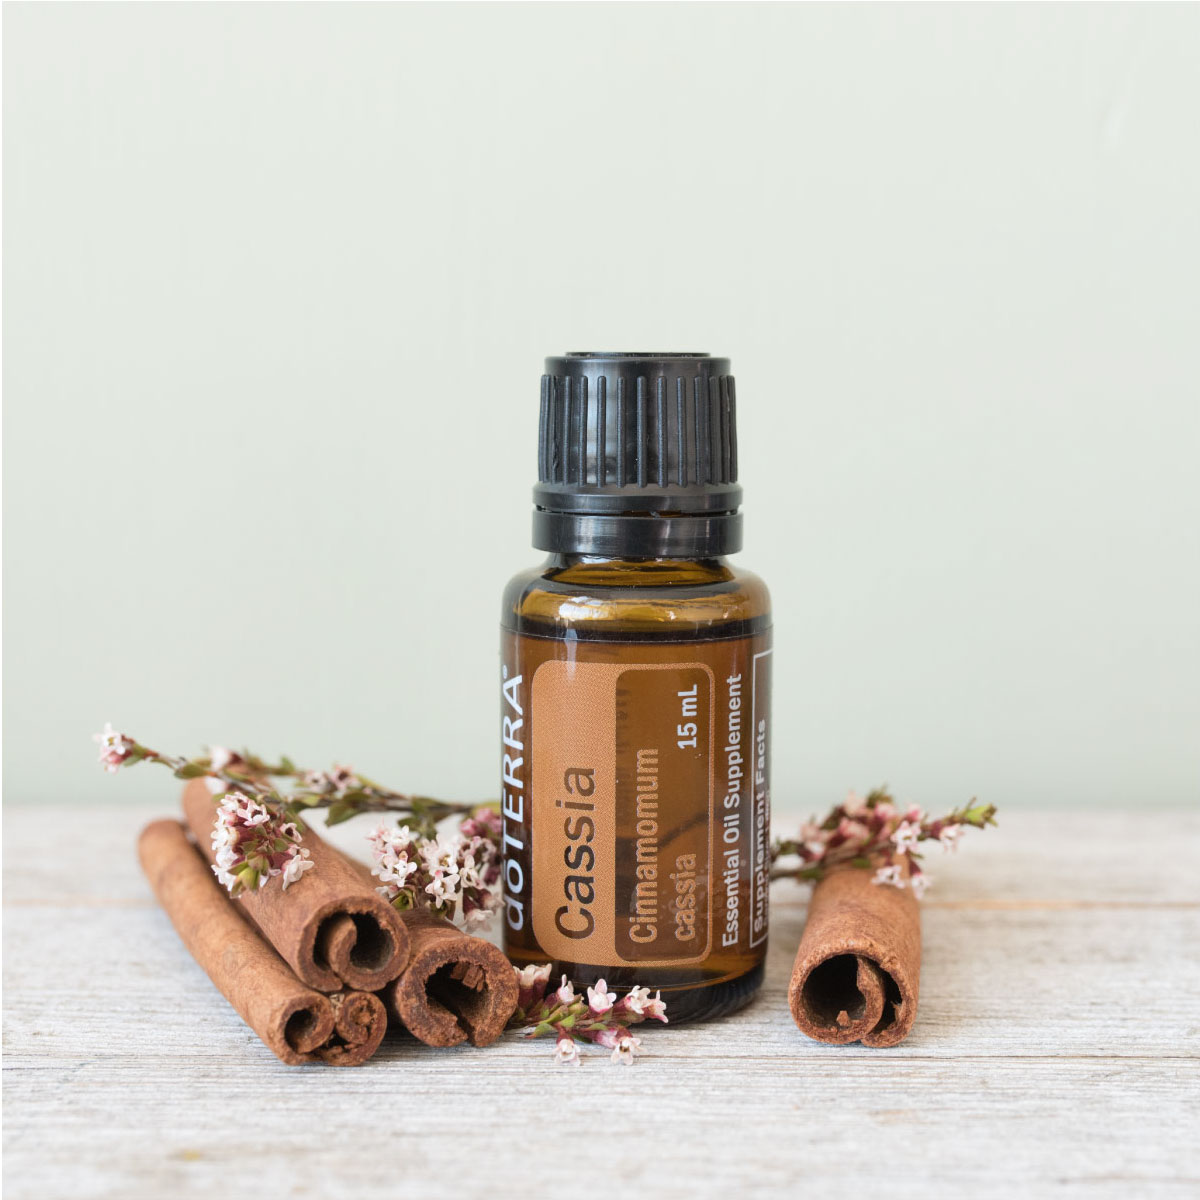 Cassia oil bottle next to fresh cassia spices. There are many benefits and uses for Cassia essential oil. Cassia oil can promote healthy digestion, help create a soothing massage, and offer immune support.*